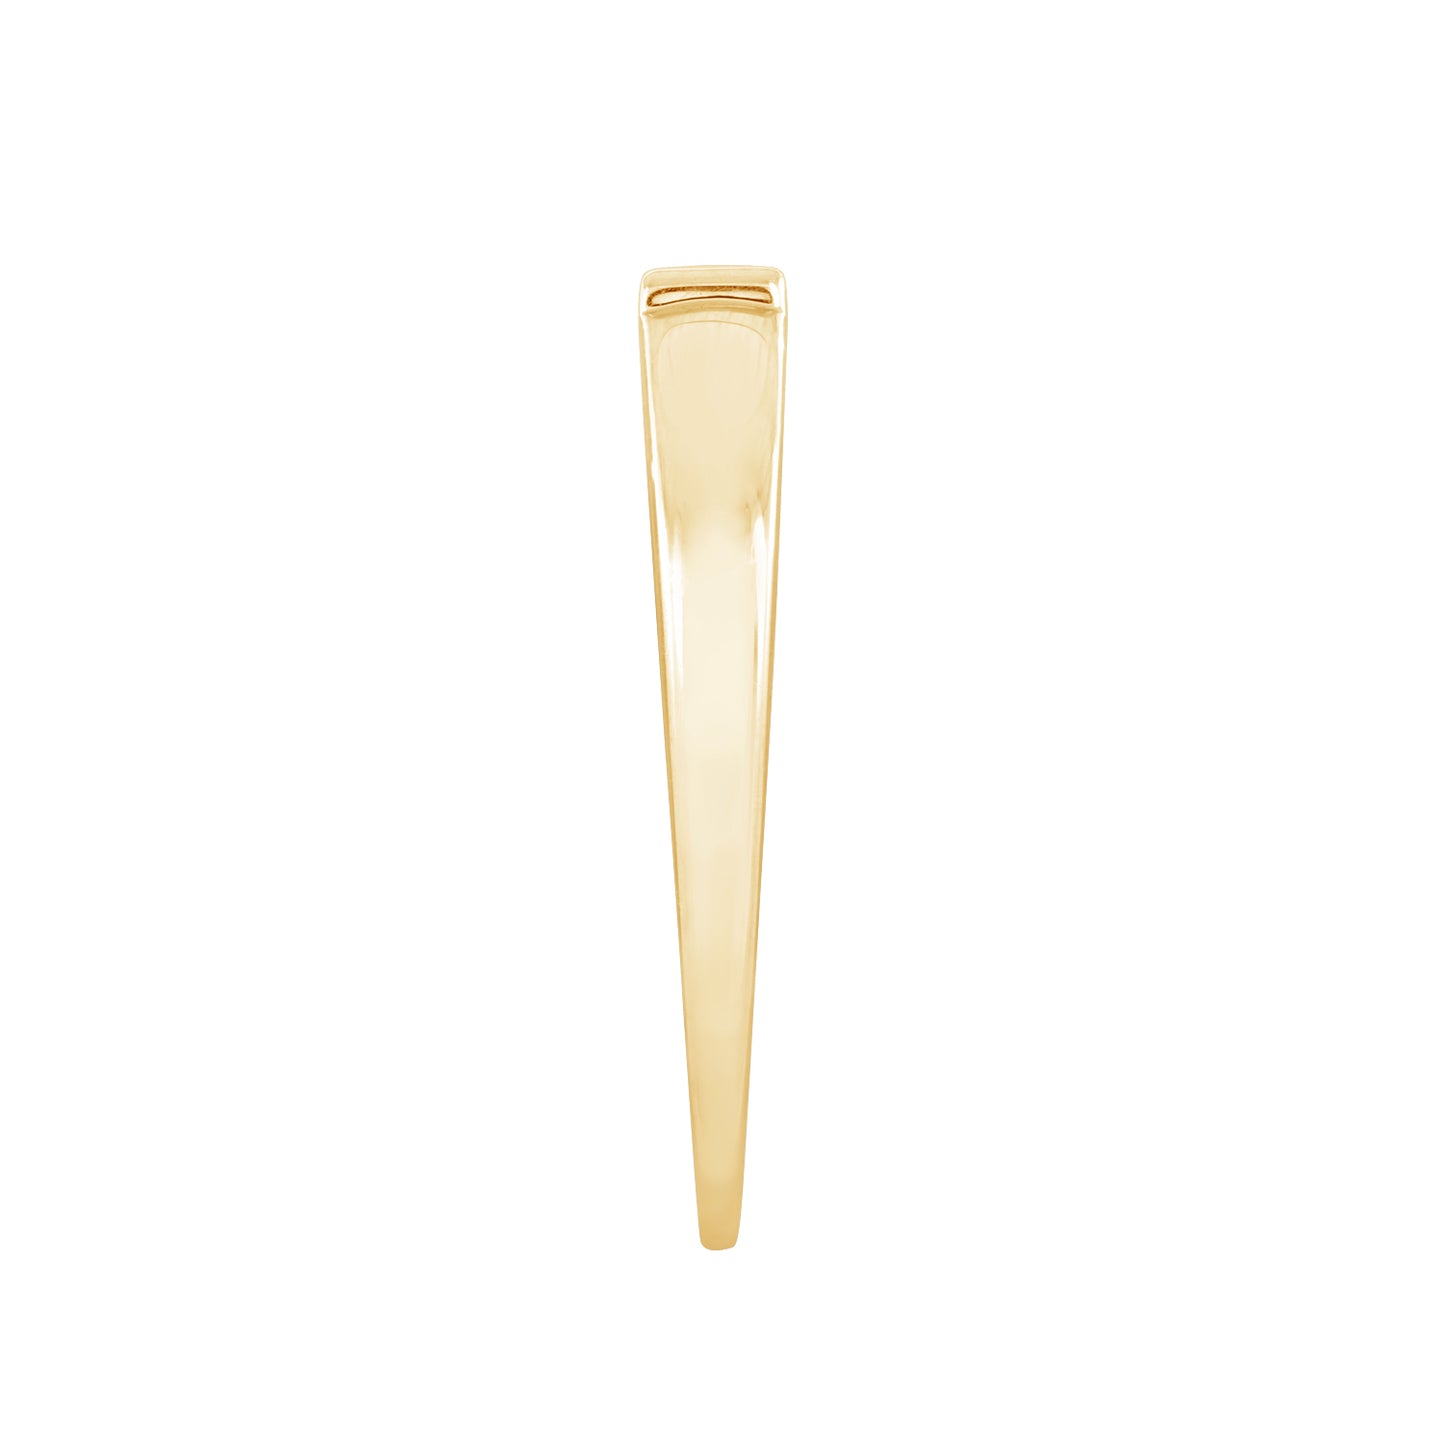 Solo Baguette Thin Dome Ring